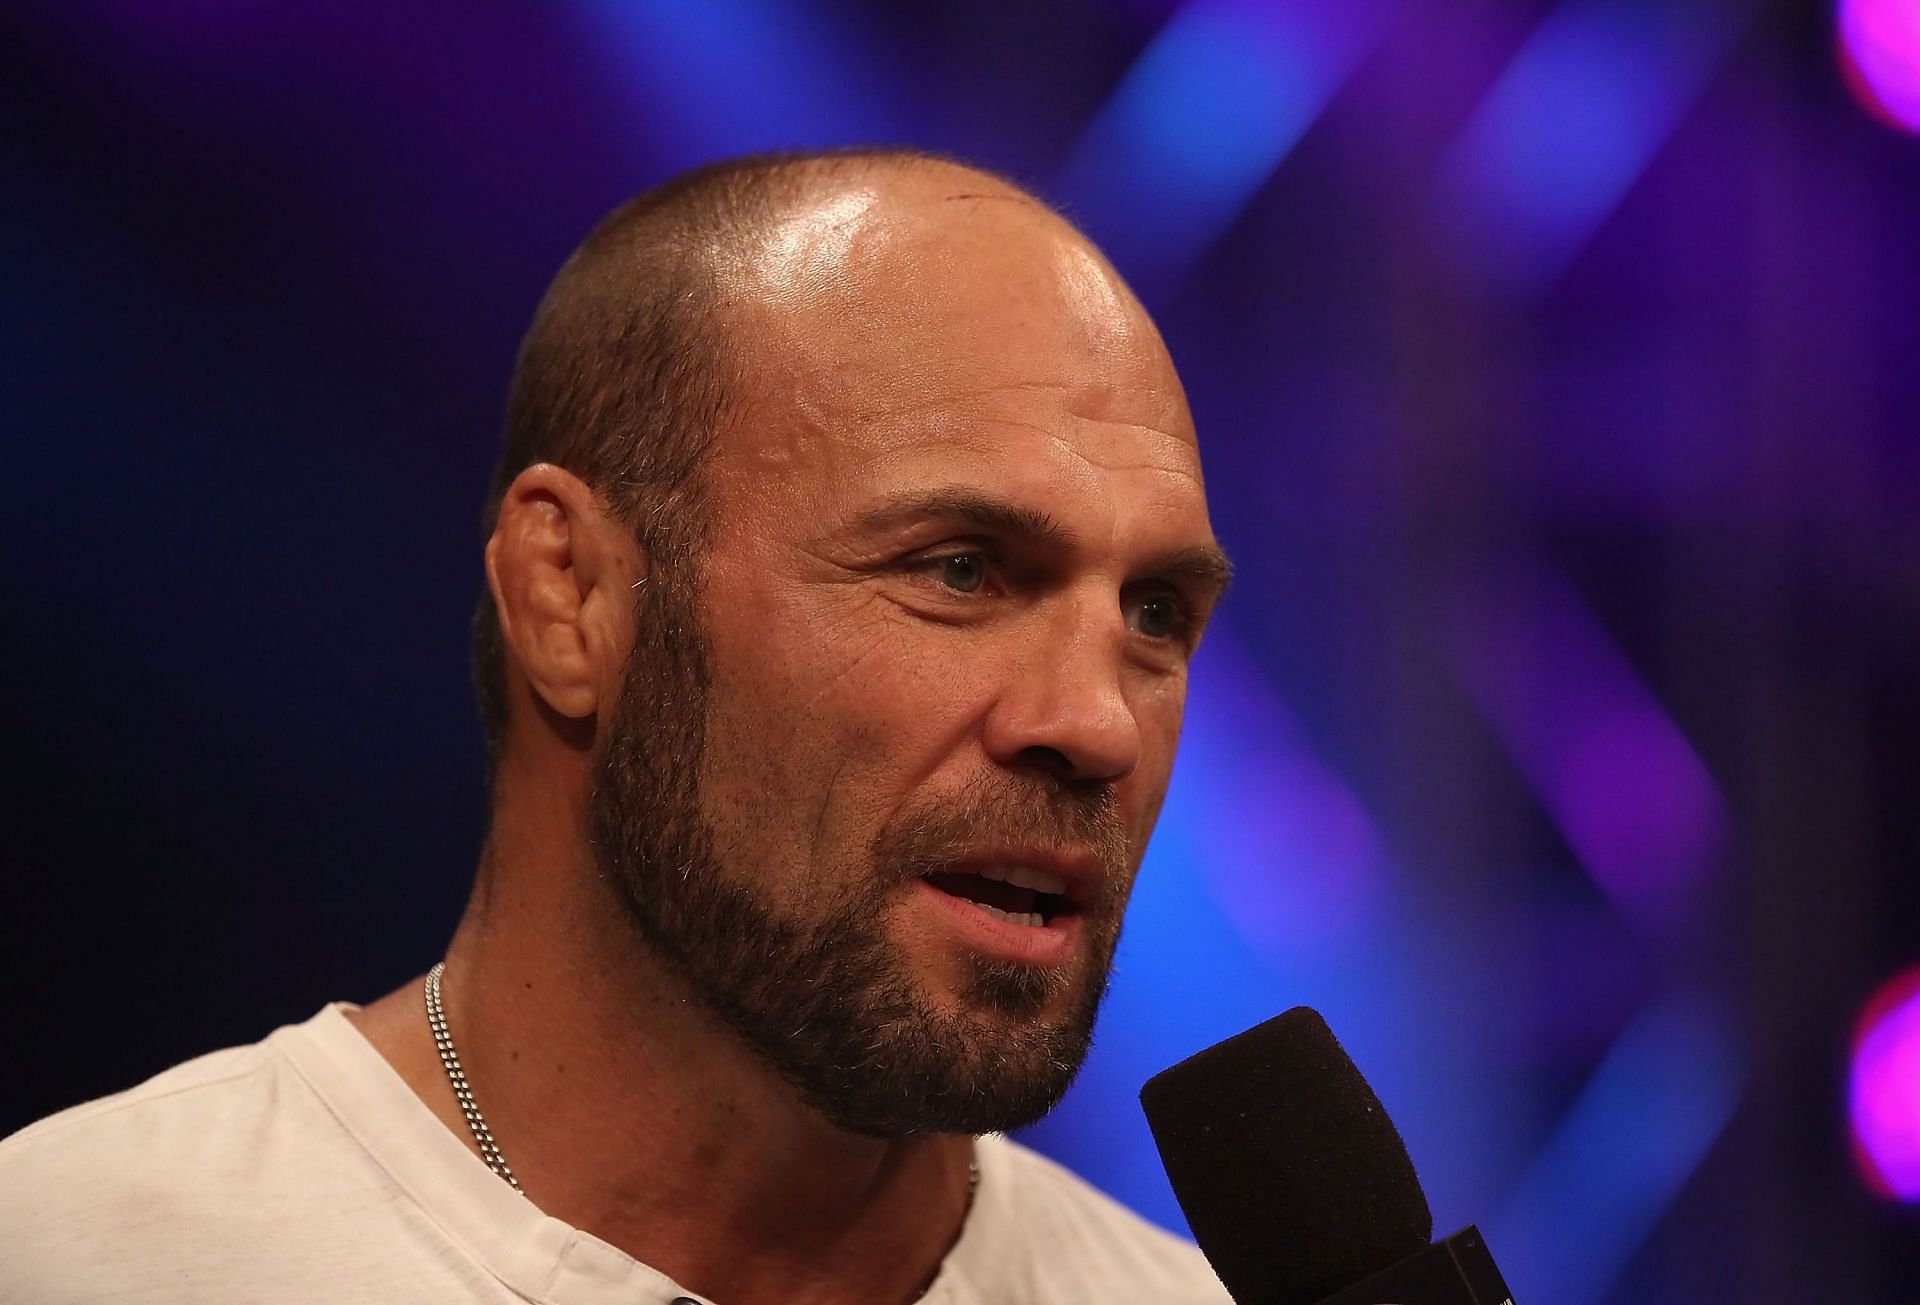 Randy Couture returned from retirement to claim heavyweight gold in 2007